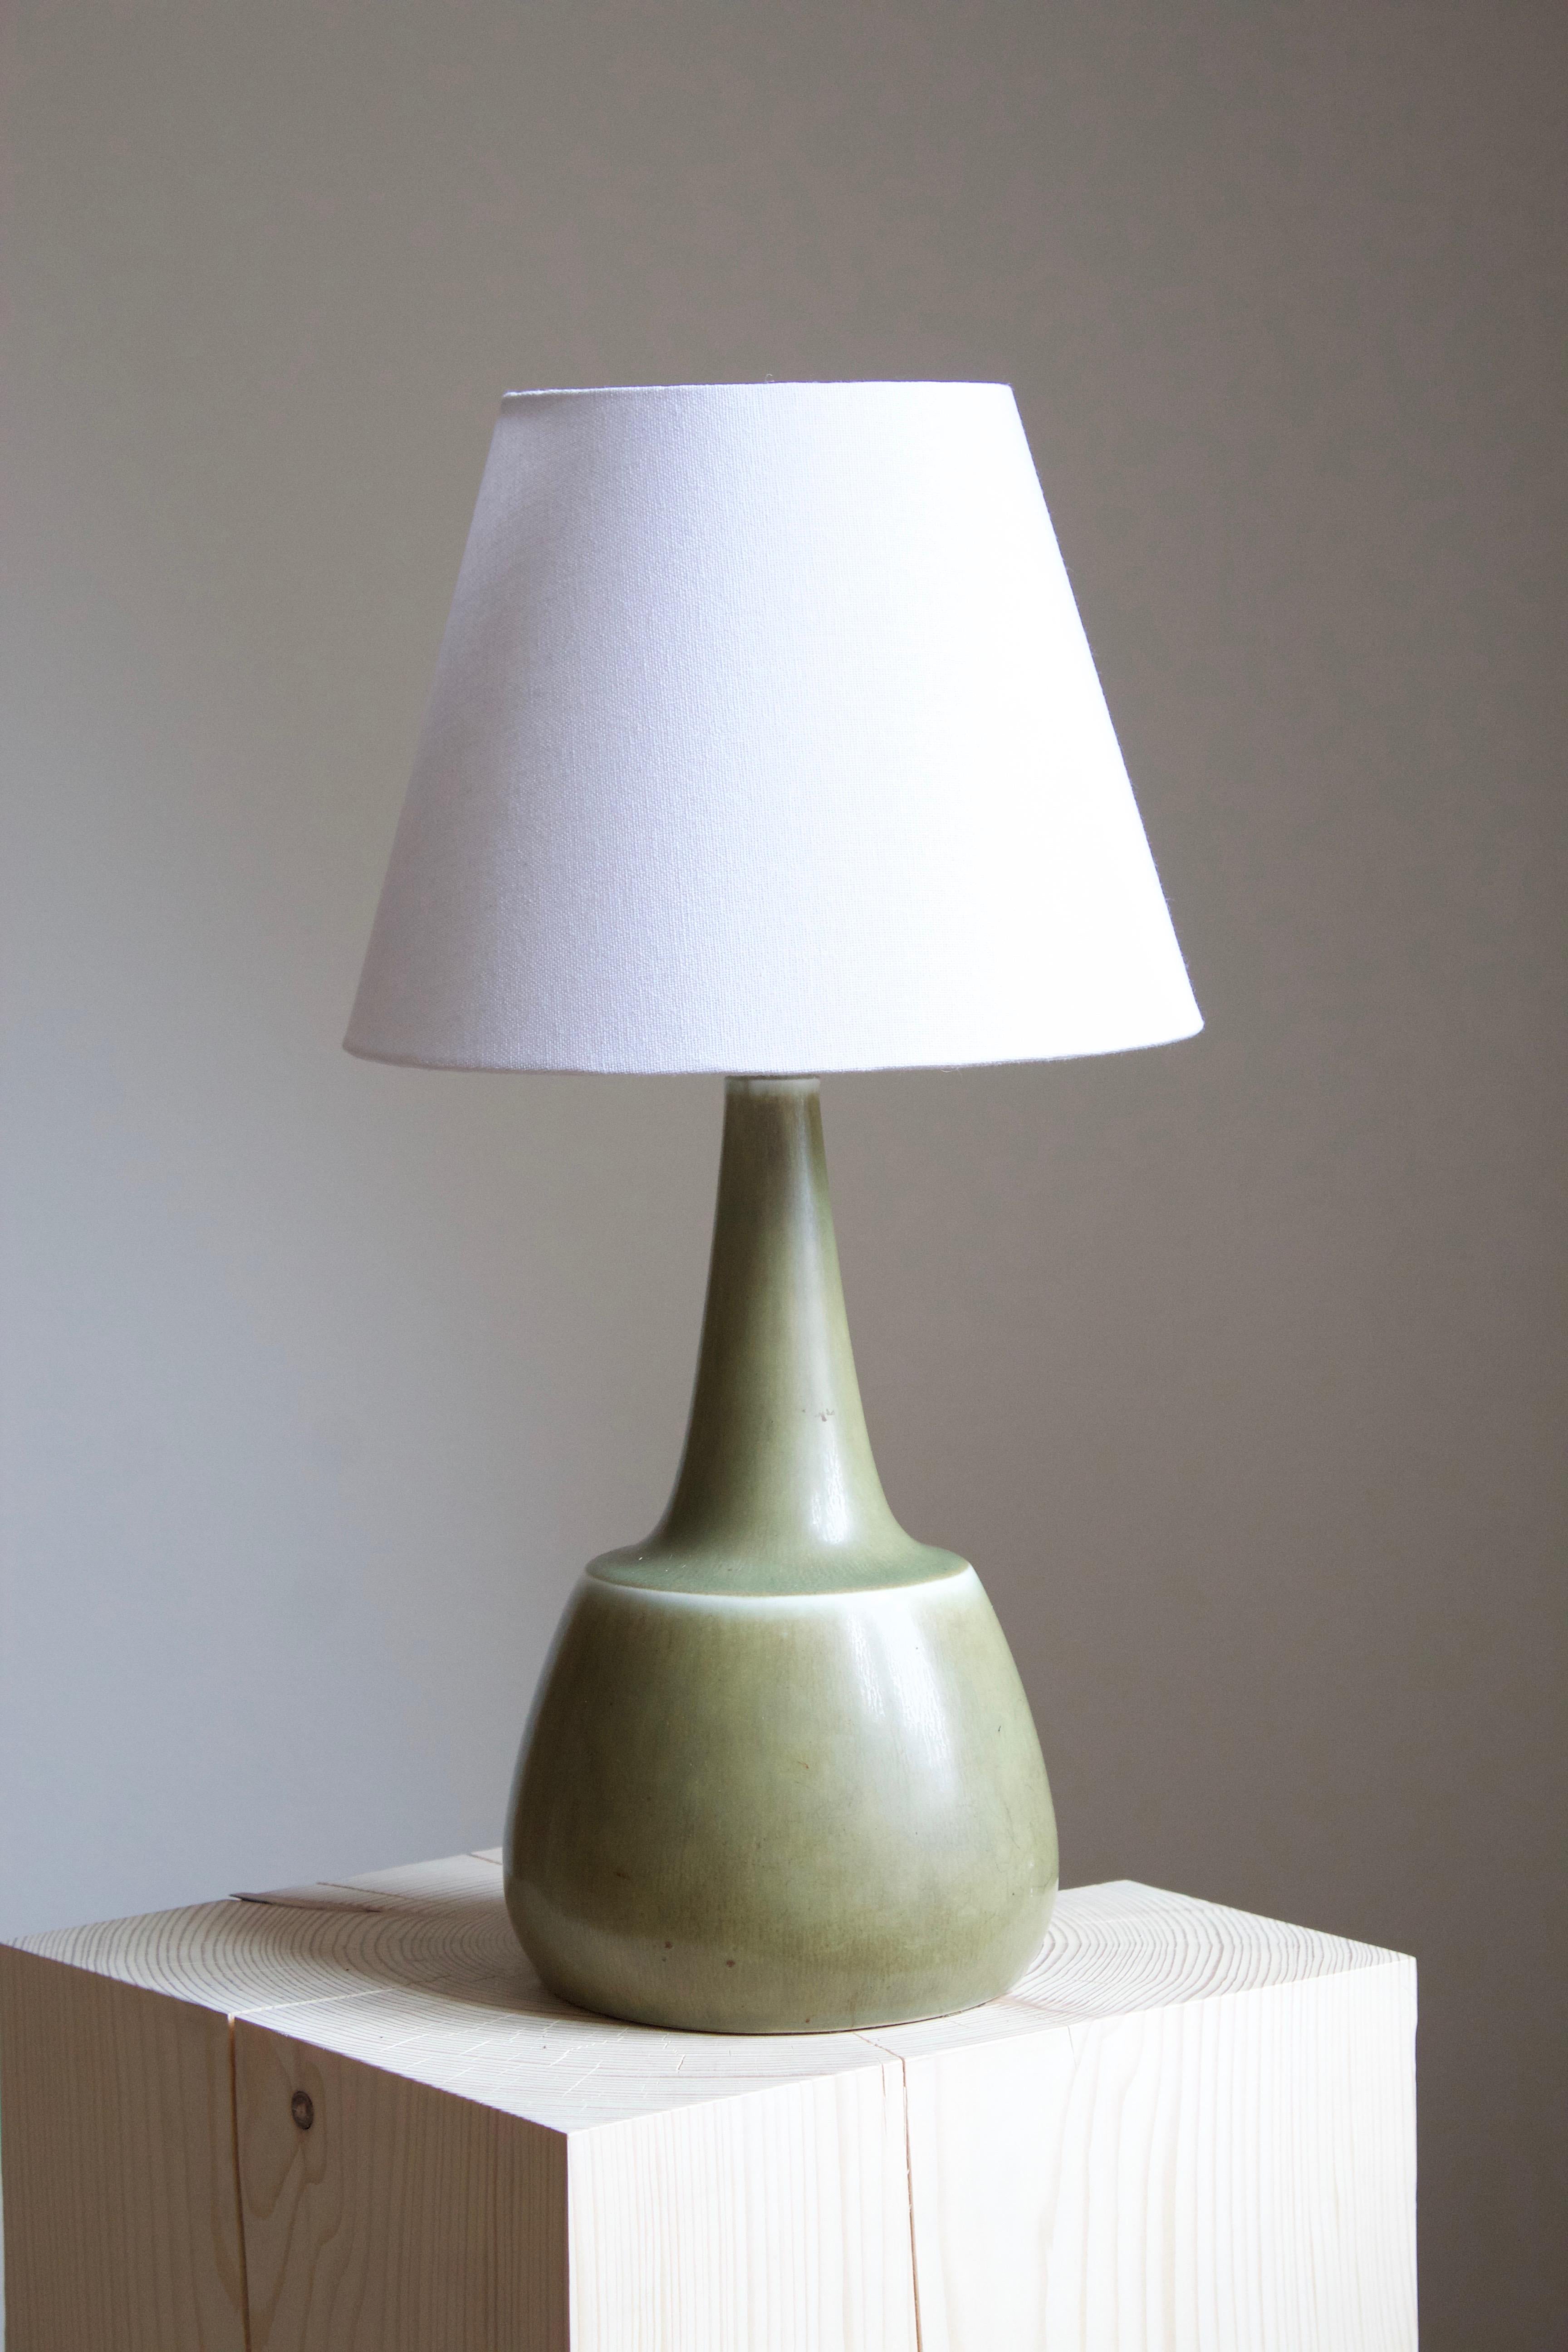 A large table / desk lamp designed by husband and wife Per & Annelise Linneman-Schmidt. Handcast in stoneware. Produced in their own Studio, named Palshus, in Sengeløse, Denmark. Signed.

Sold without lampshade. Stated dimensions exclude